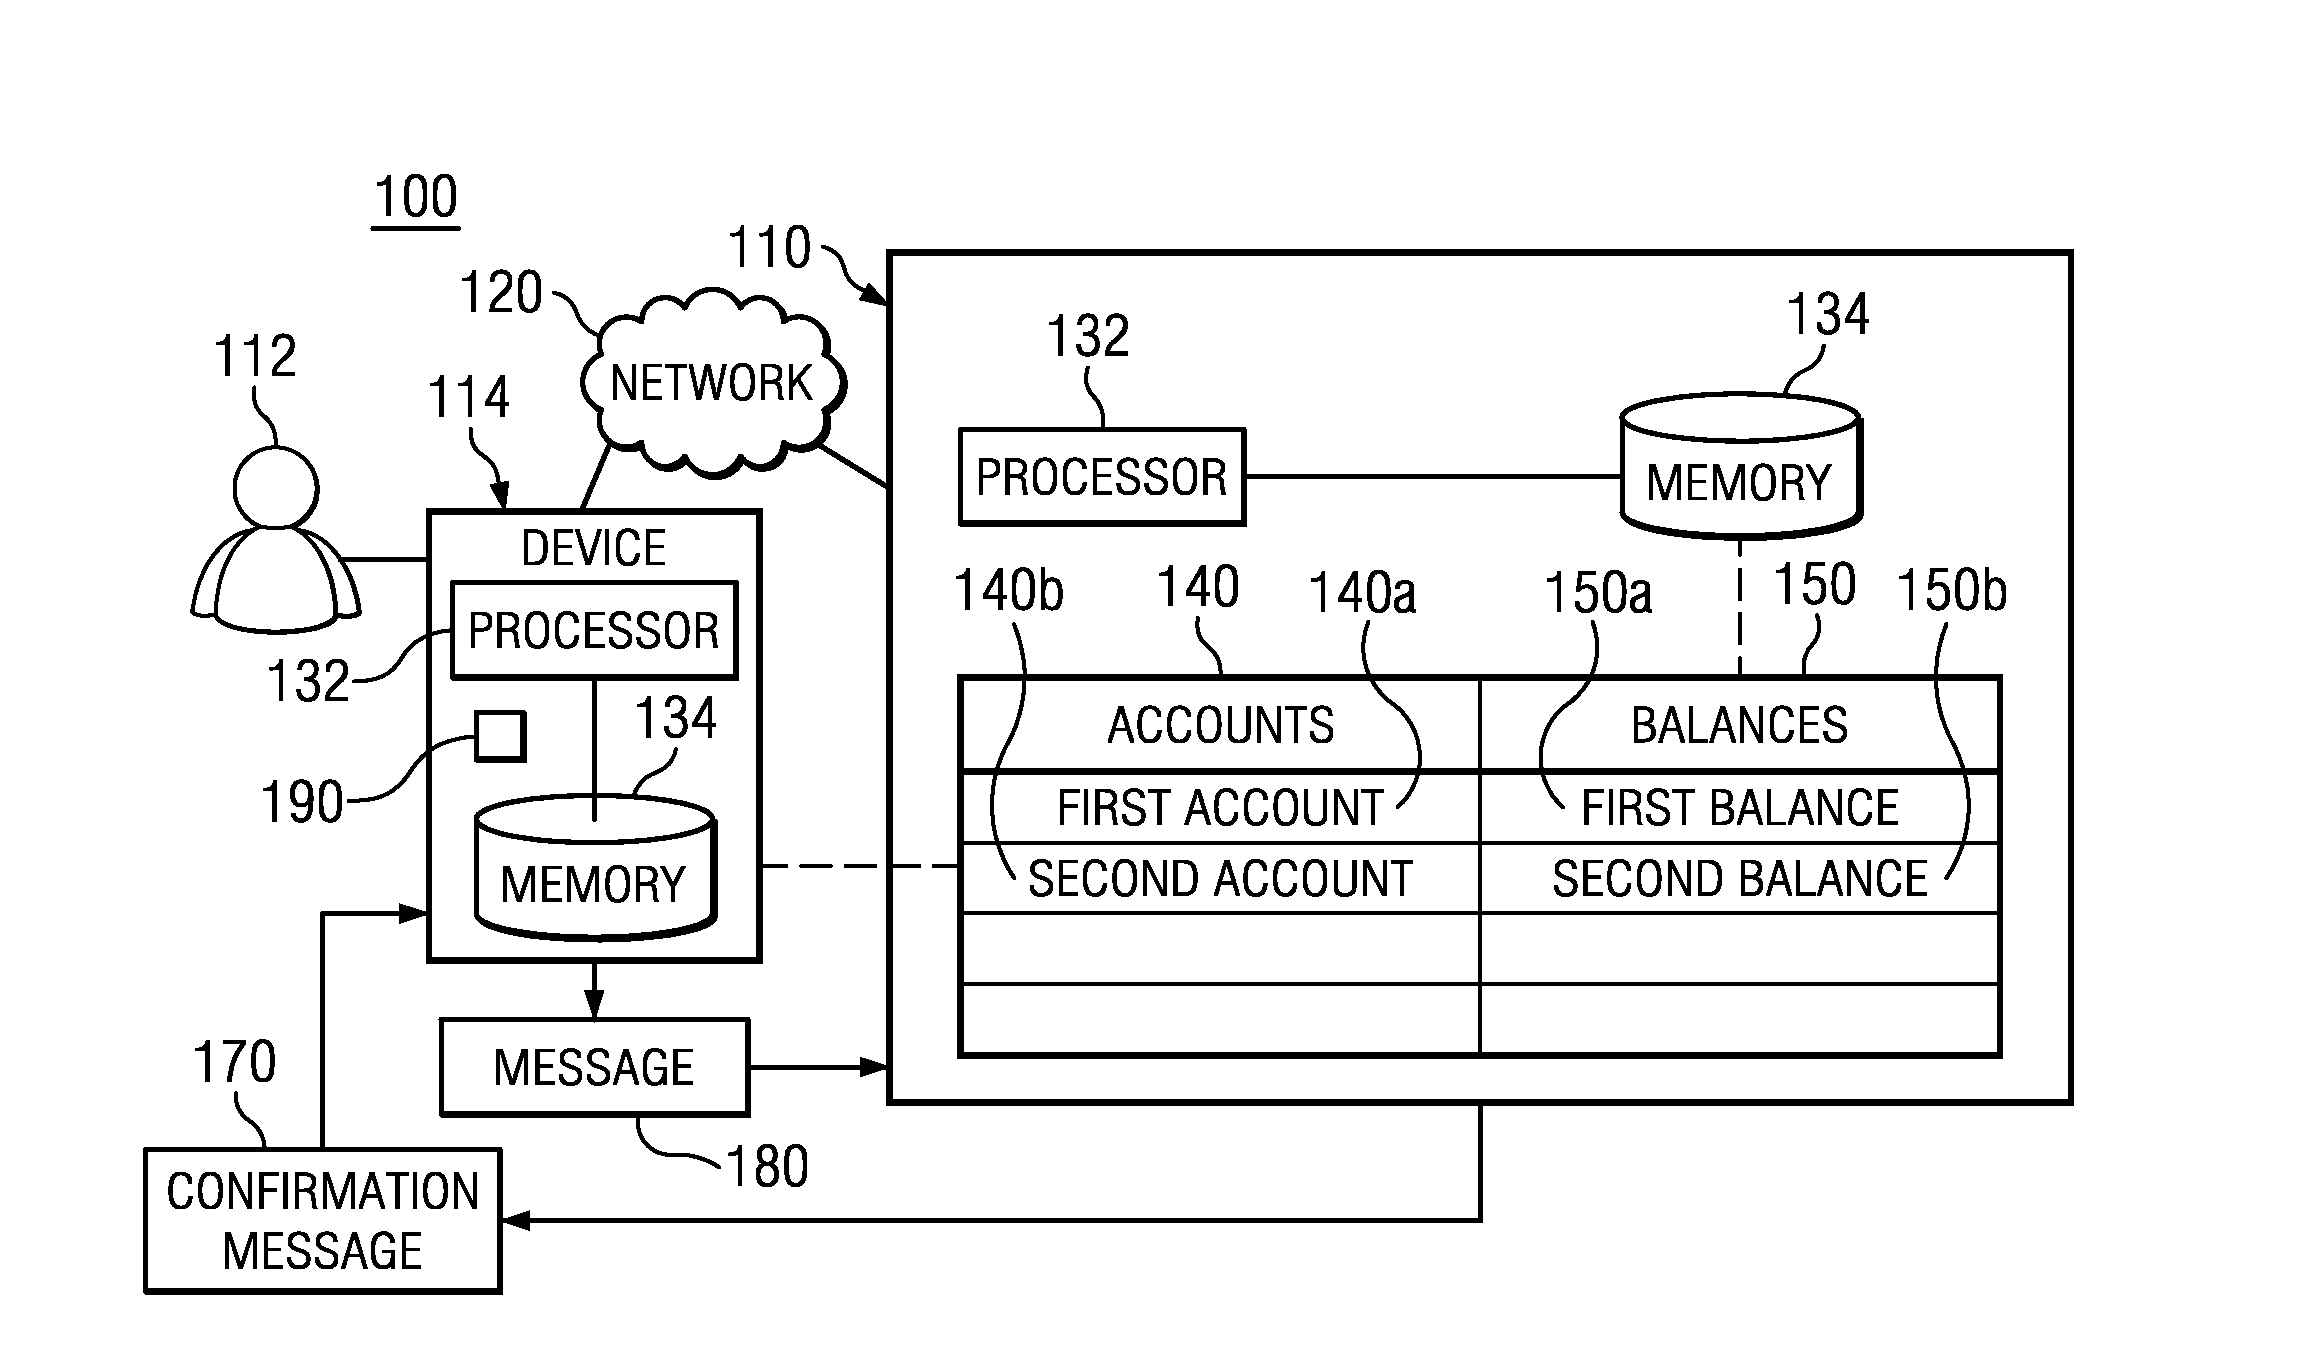 Apparatus and Method for the Electronic Transfer of Balances Between Accounts